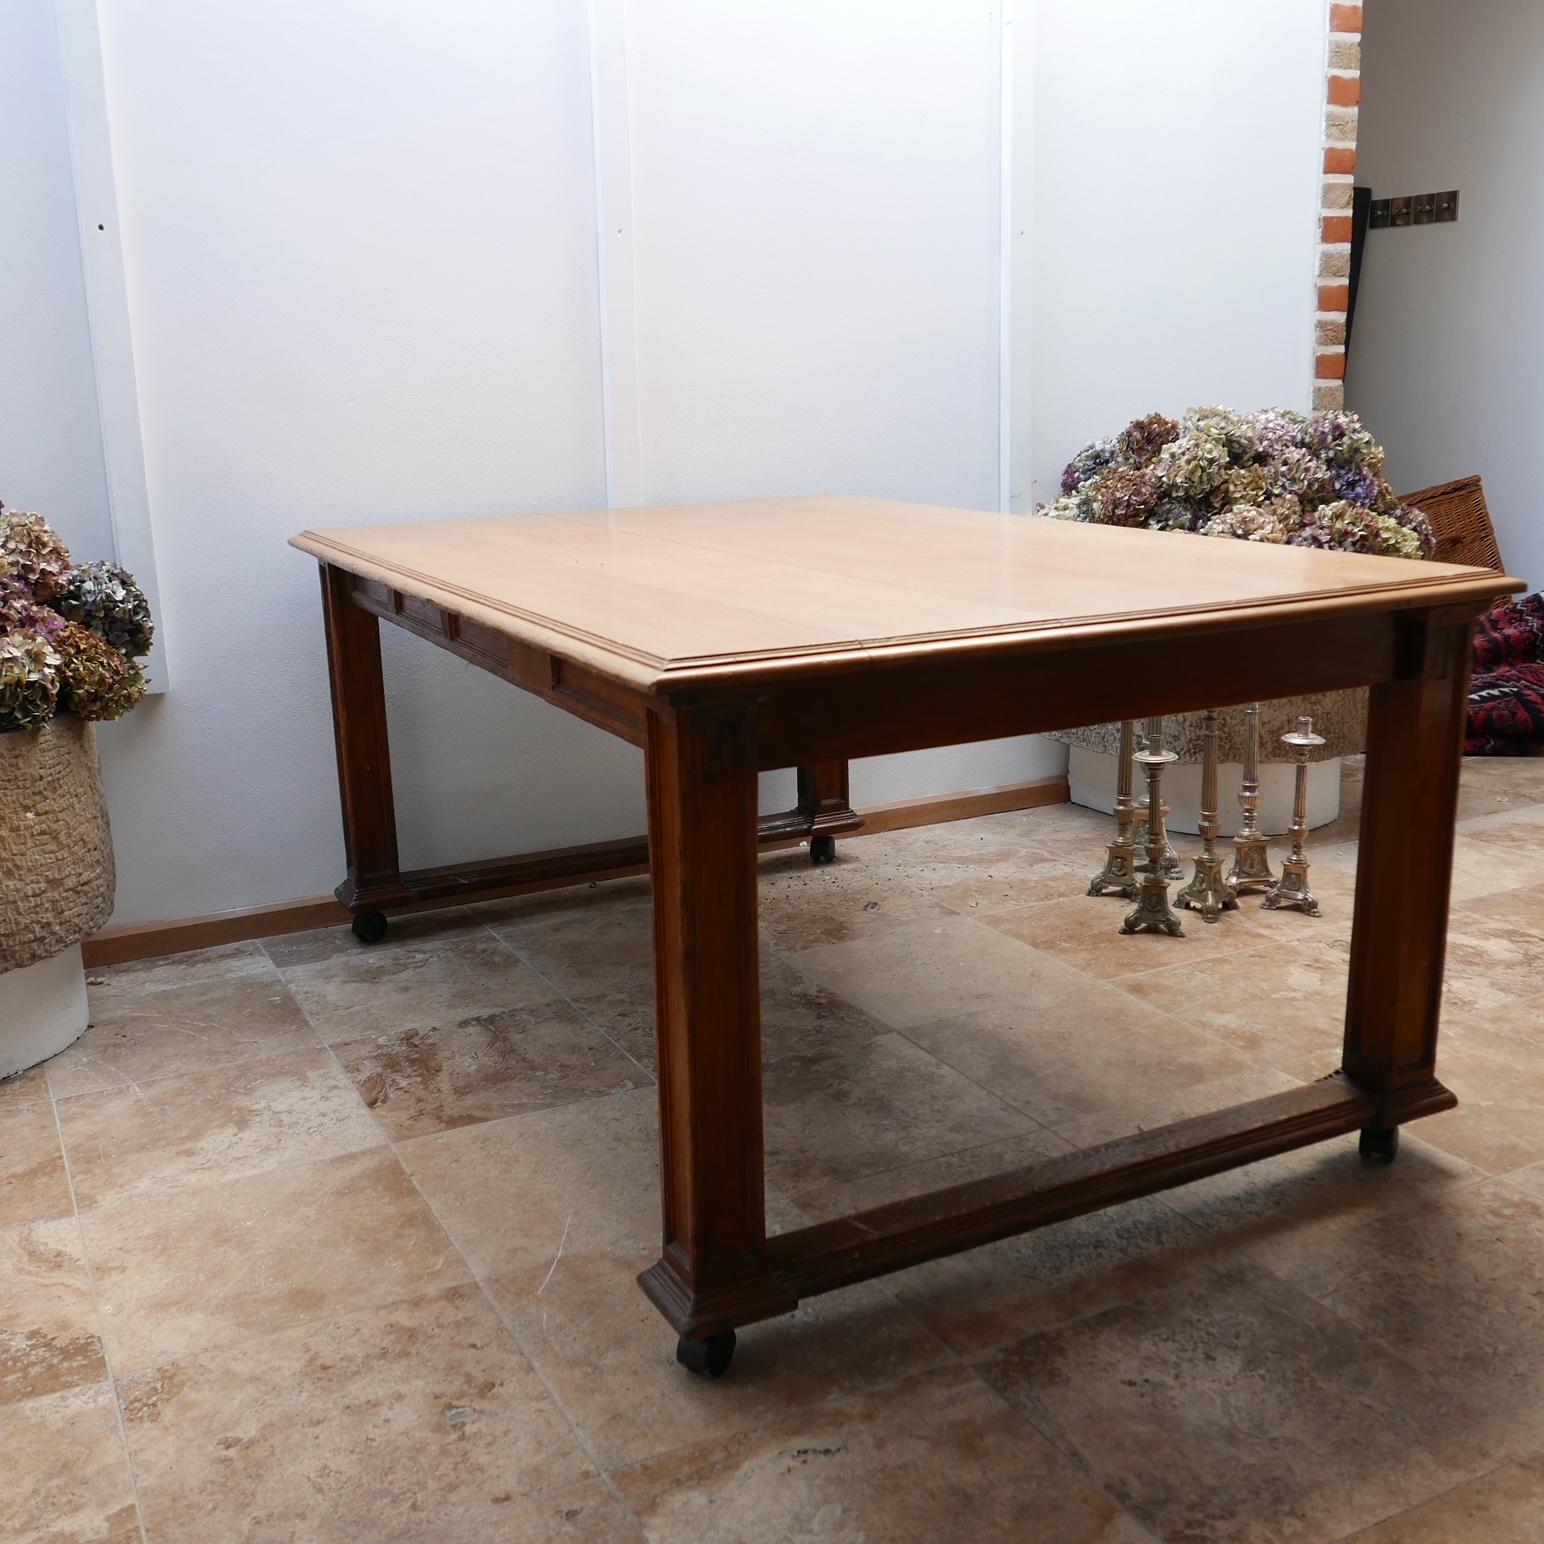 British Antique English Oak Refectory Table or Kitchen Island